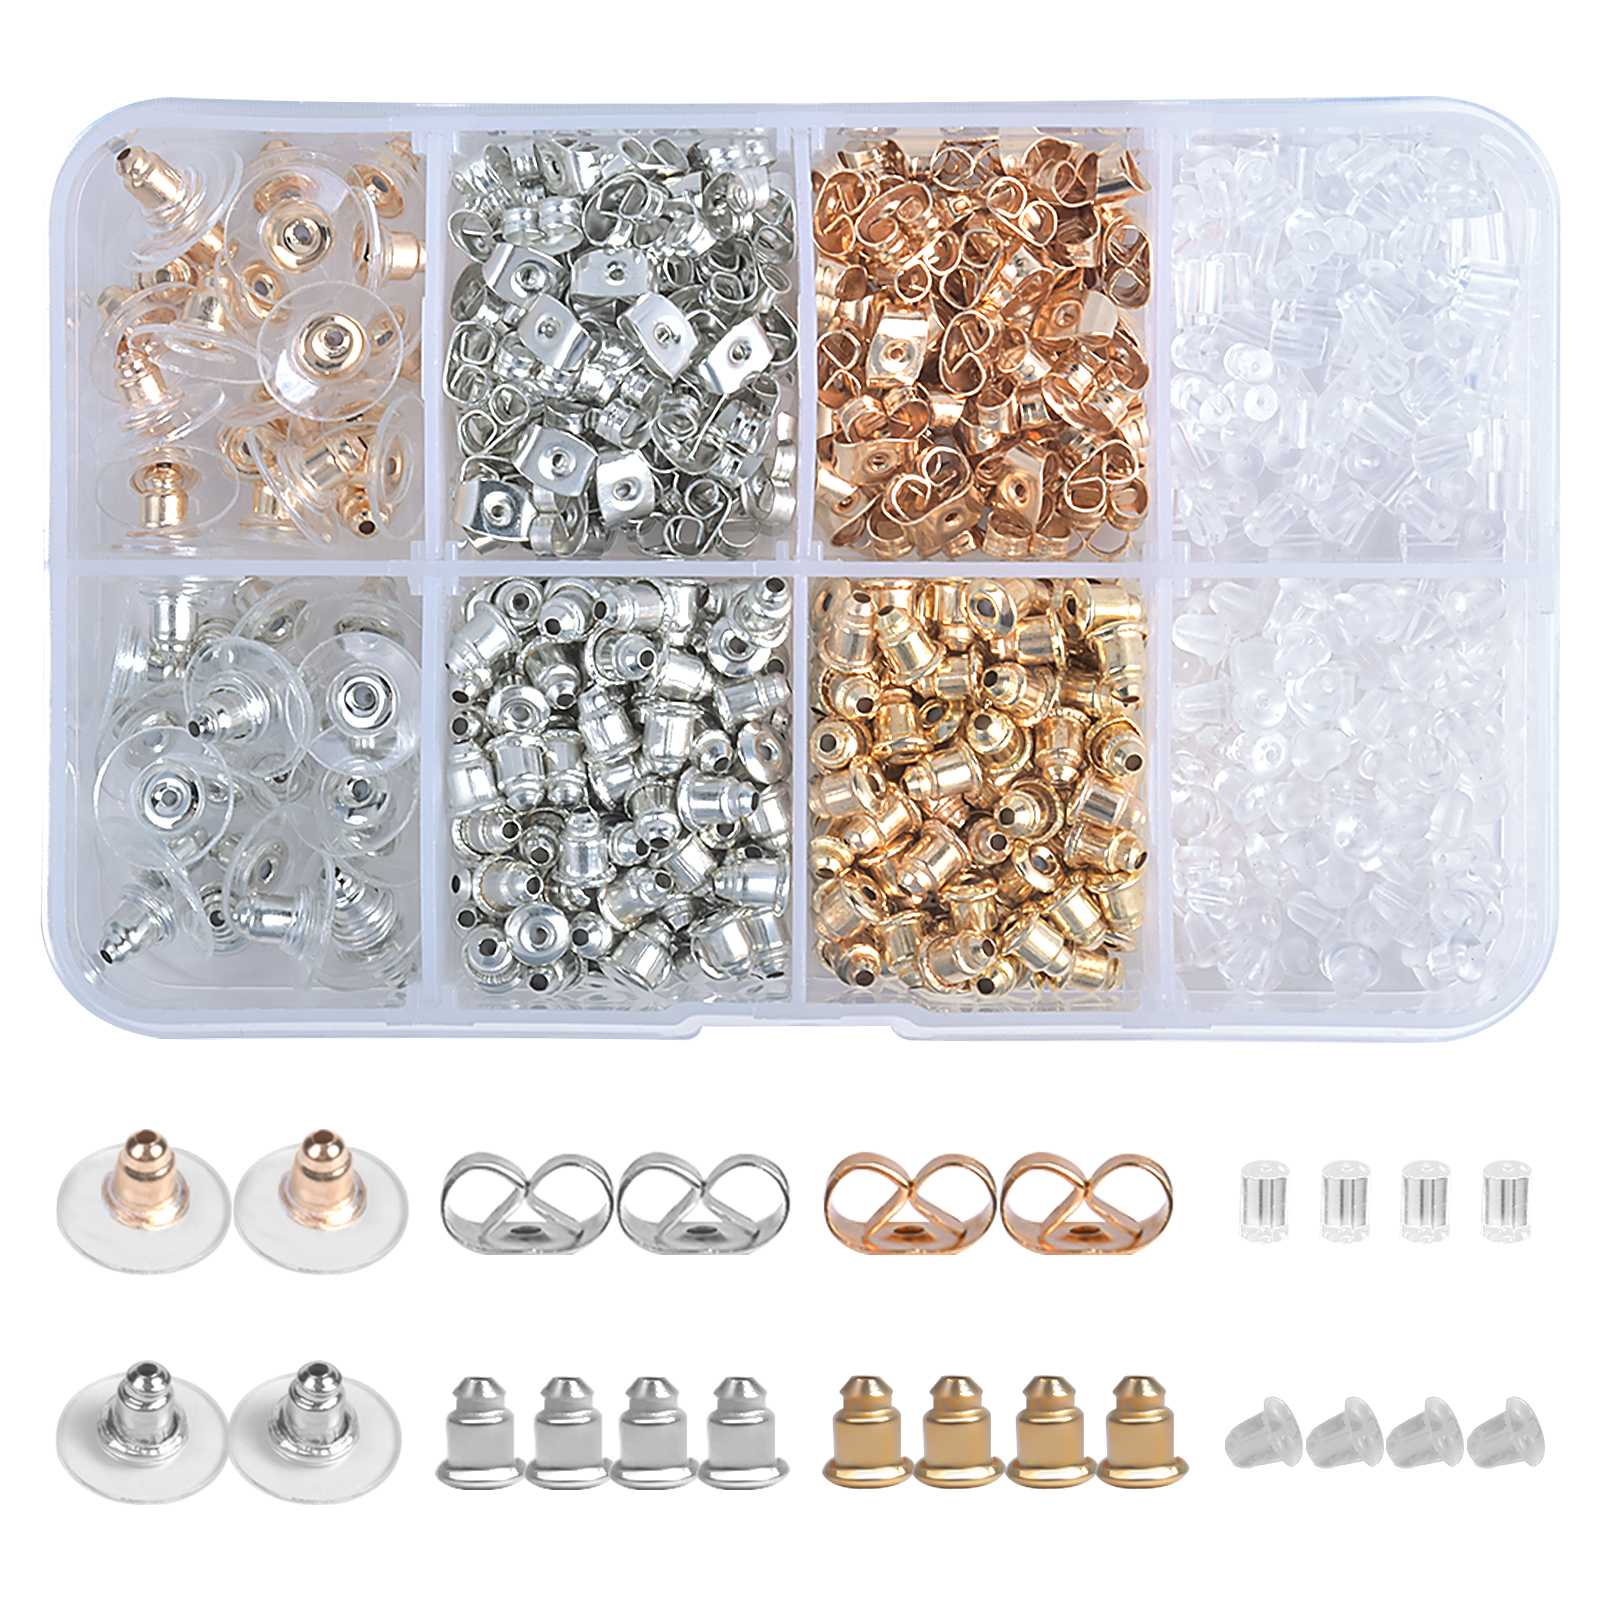 12Pcs Earring Backs 18K White Gold Earring Backs Replacements for Studs  Hoops Fish Hook Droopy Hypoallergenic Soft Secure Safety Earrings Backings